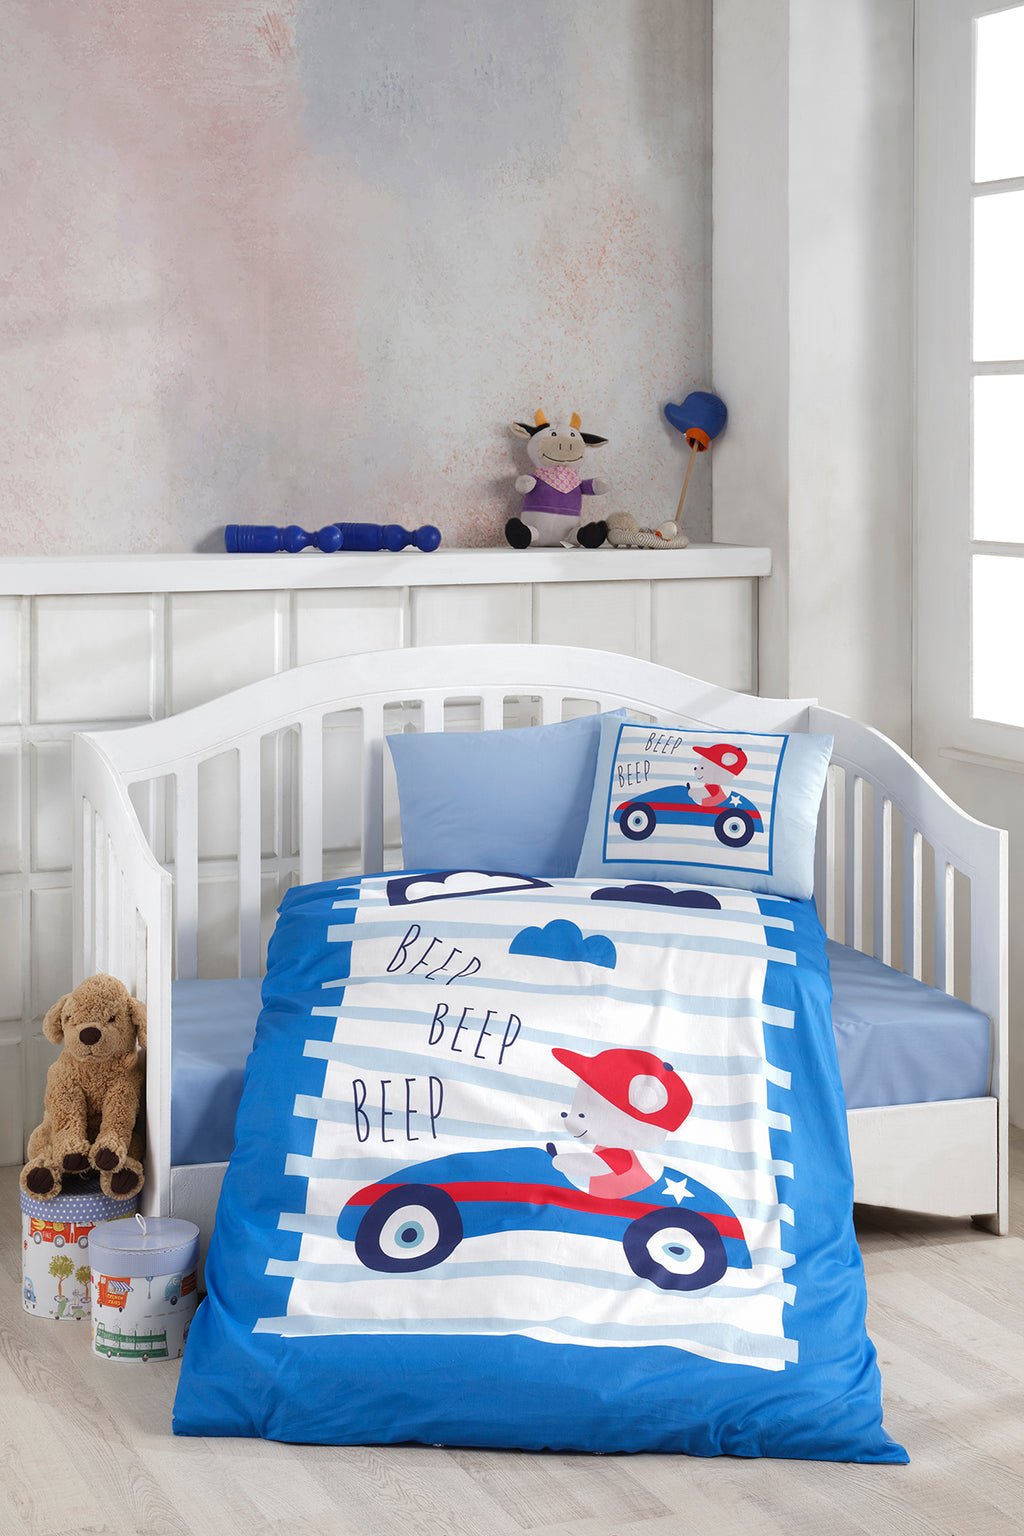 100% Turkish Cotton Baby Duvet Cover Set of 4  Size  Duvet cover: 100 cm x 150 cm  Flatsheet :120 cm x 160 cm  Pillows : 35 cm 45 cm each  Please note that the duvet is not included.  Product Details  Complete your little one's bedding with the cute panda design on the duvet set. Made from 100 % Turkish Cotton, our machine washable sets consist of a duvet cover, a flat sheet and two matching pillow cases. Little ones will absolutely enjoy snuggling into soft cotton fabric. Sweet dreams :)